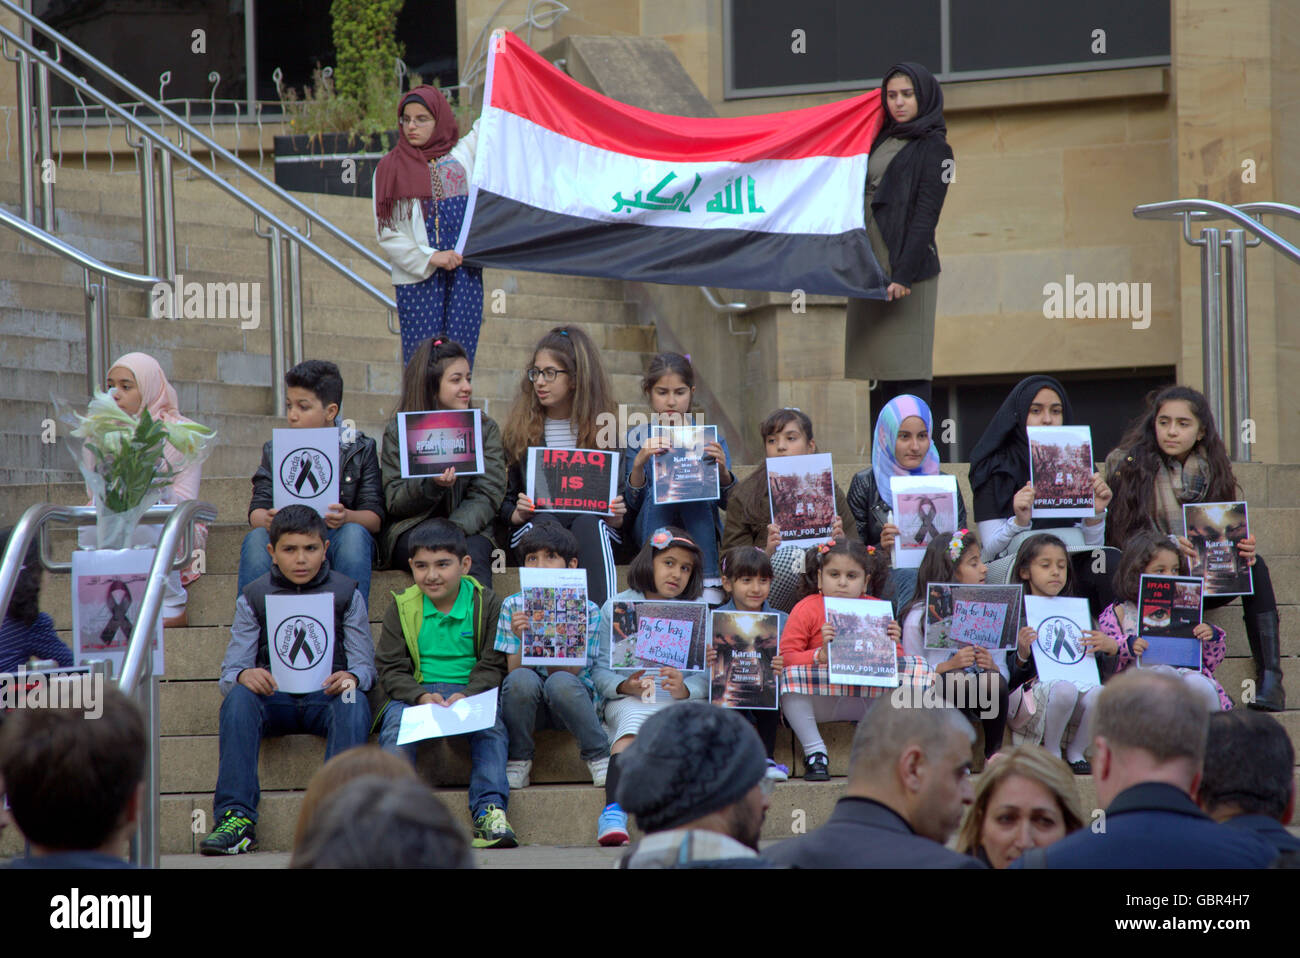 Glasgow, Scotland, UK 7th July 2016. Scottish Iraqi Association hold a candlelit vigil to commemorate the hundreds of innocent Iraqi civilians who lost their lives in the recent atrocious bombings in Karrada, Baghdad during the month of Ramadan and all victims of terrorist attacks and bombings around the world. Attended by local Iraqi dignitaries, as well as  Frank McAveety the leader of Glasgow district council and Humza Yousaf The Minister for Transport and the Islands in the Scottish parliament for the S.N.P. Credit:  Gerard Ferry/Alamy Live News Stock Photo